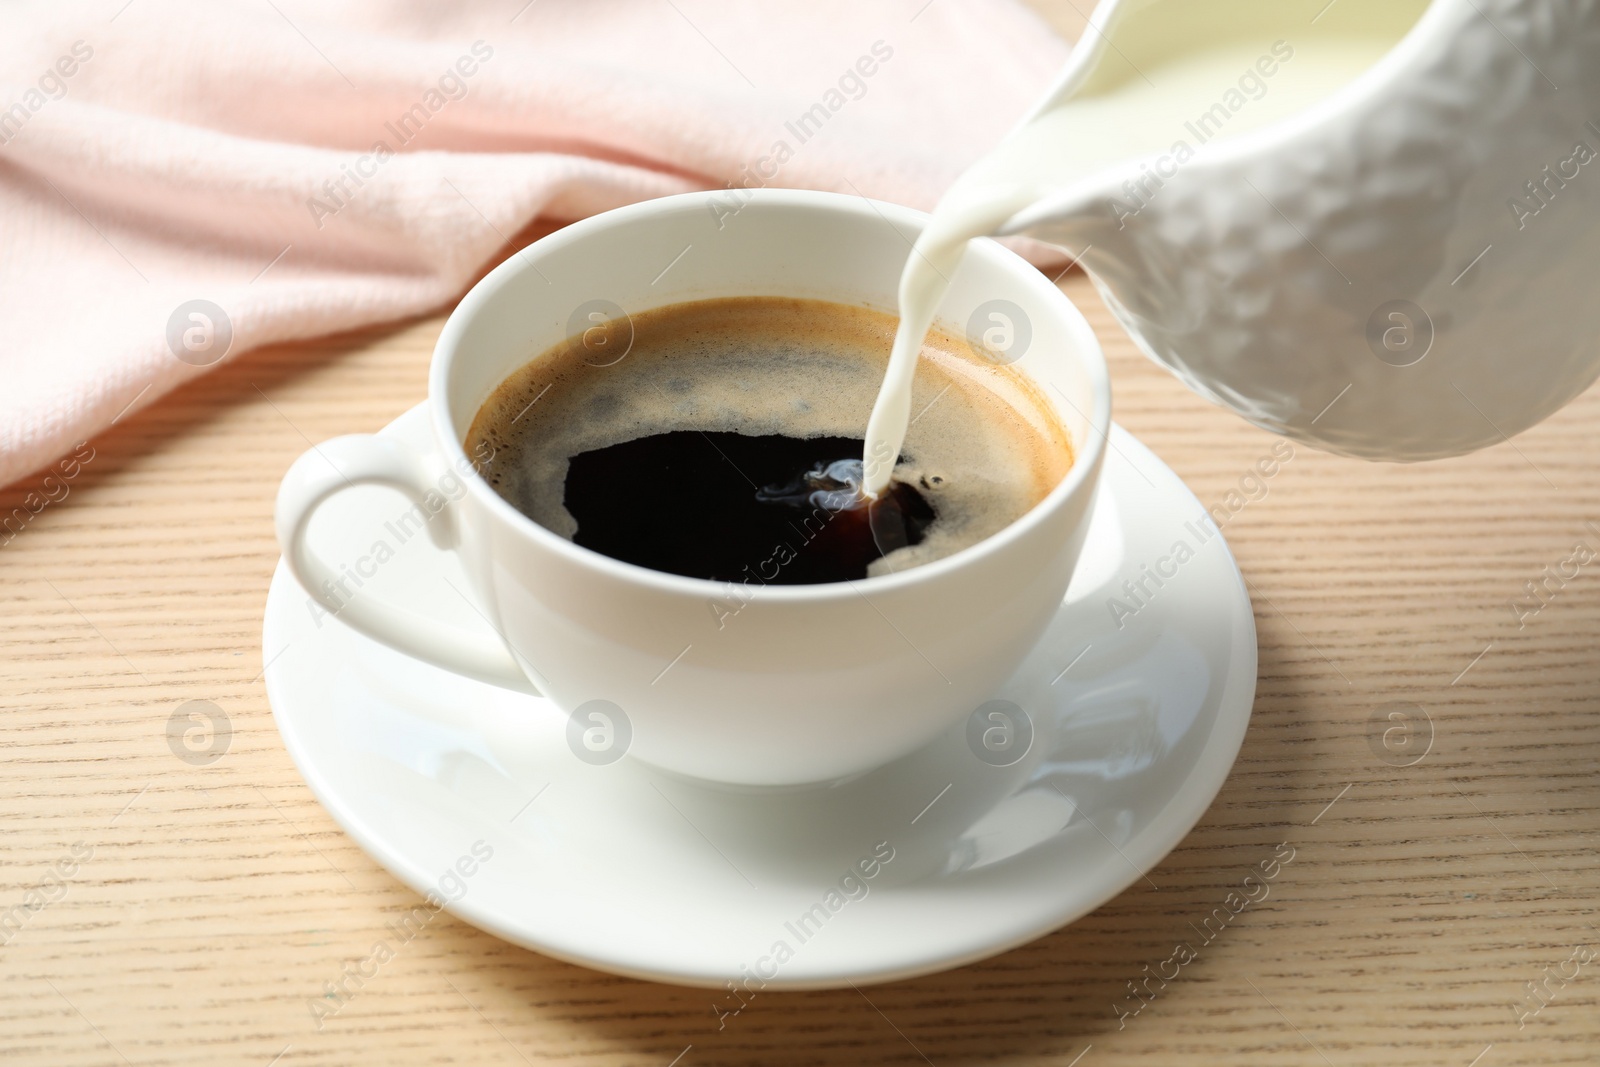 Photo of Pouring milk into cup of hot coffee on wooden table